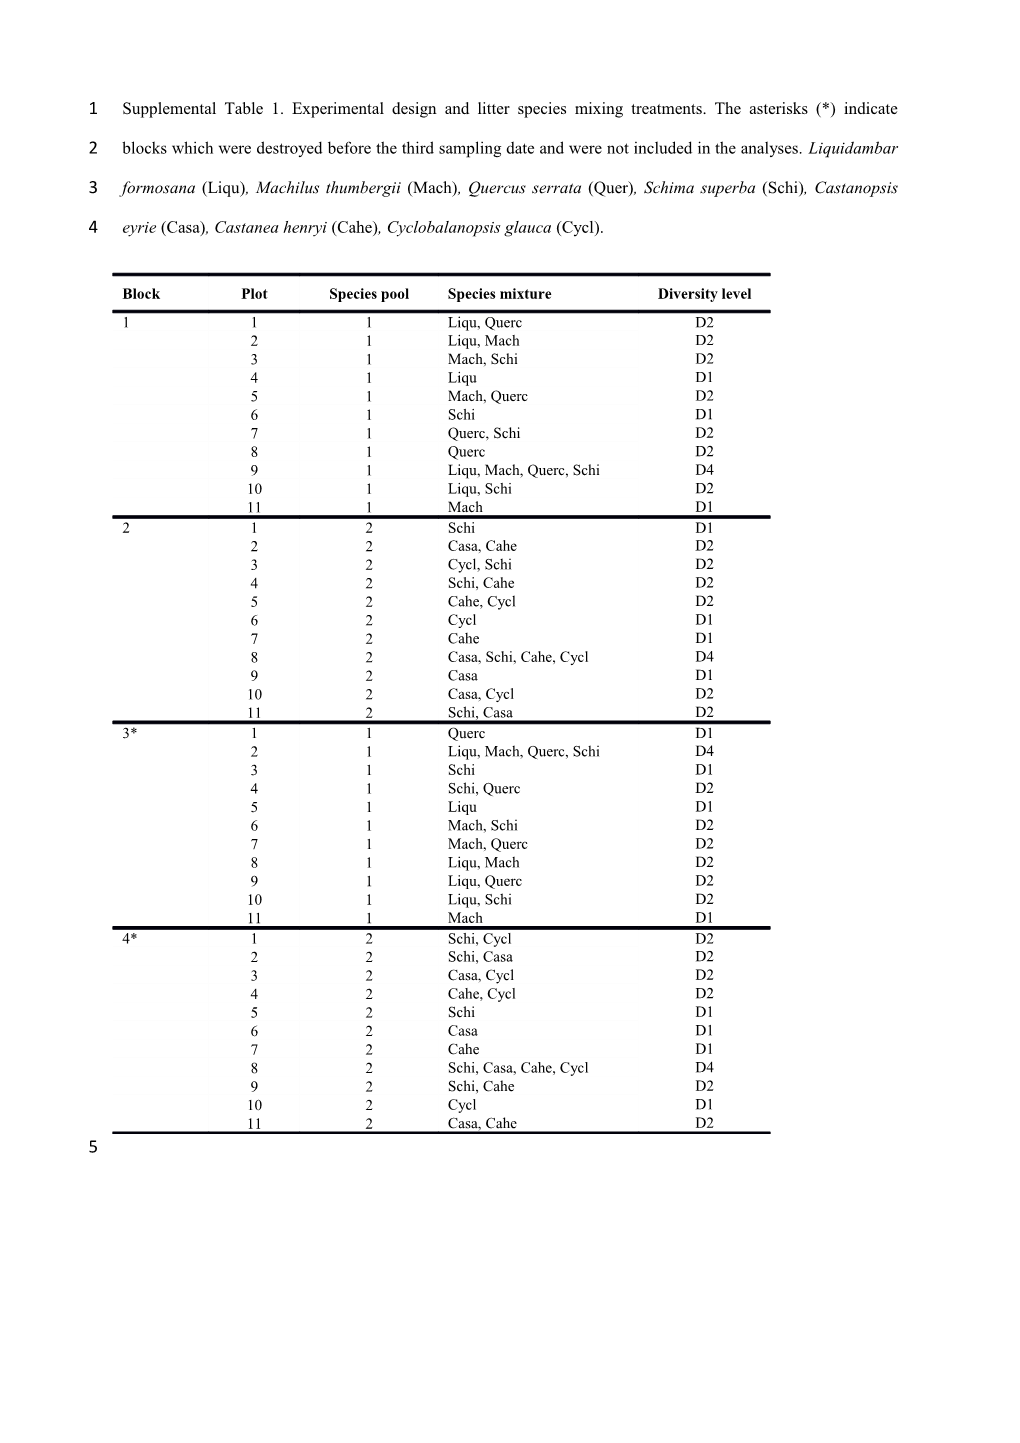 Supplemental Table 1.Experimental Design and Litter Species Mixing Treatments. the Asterisks